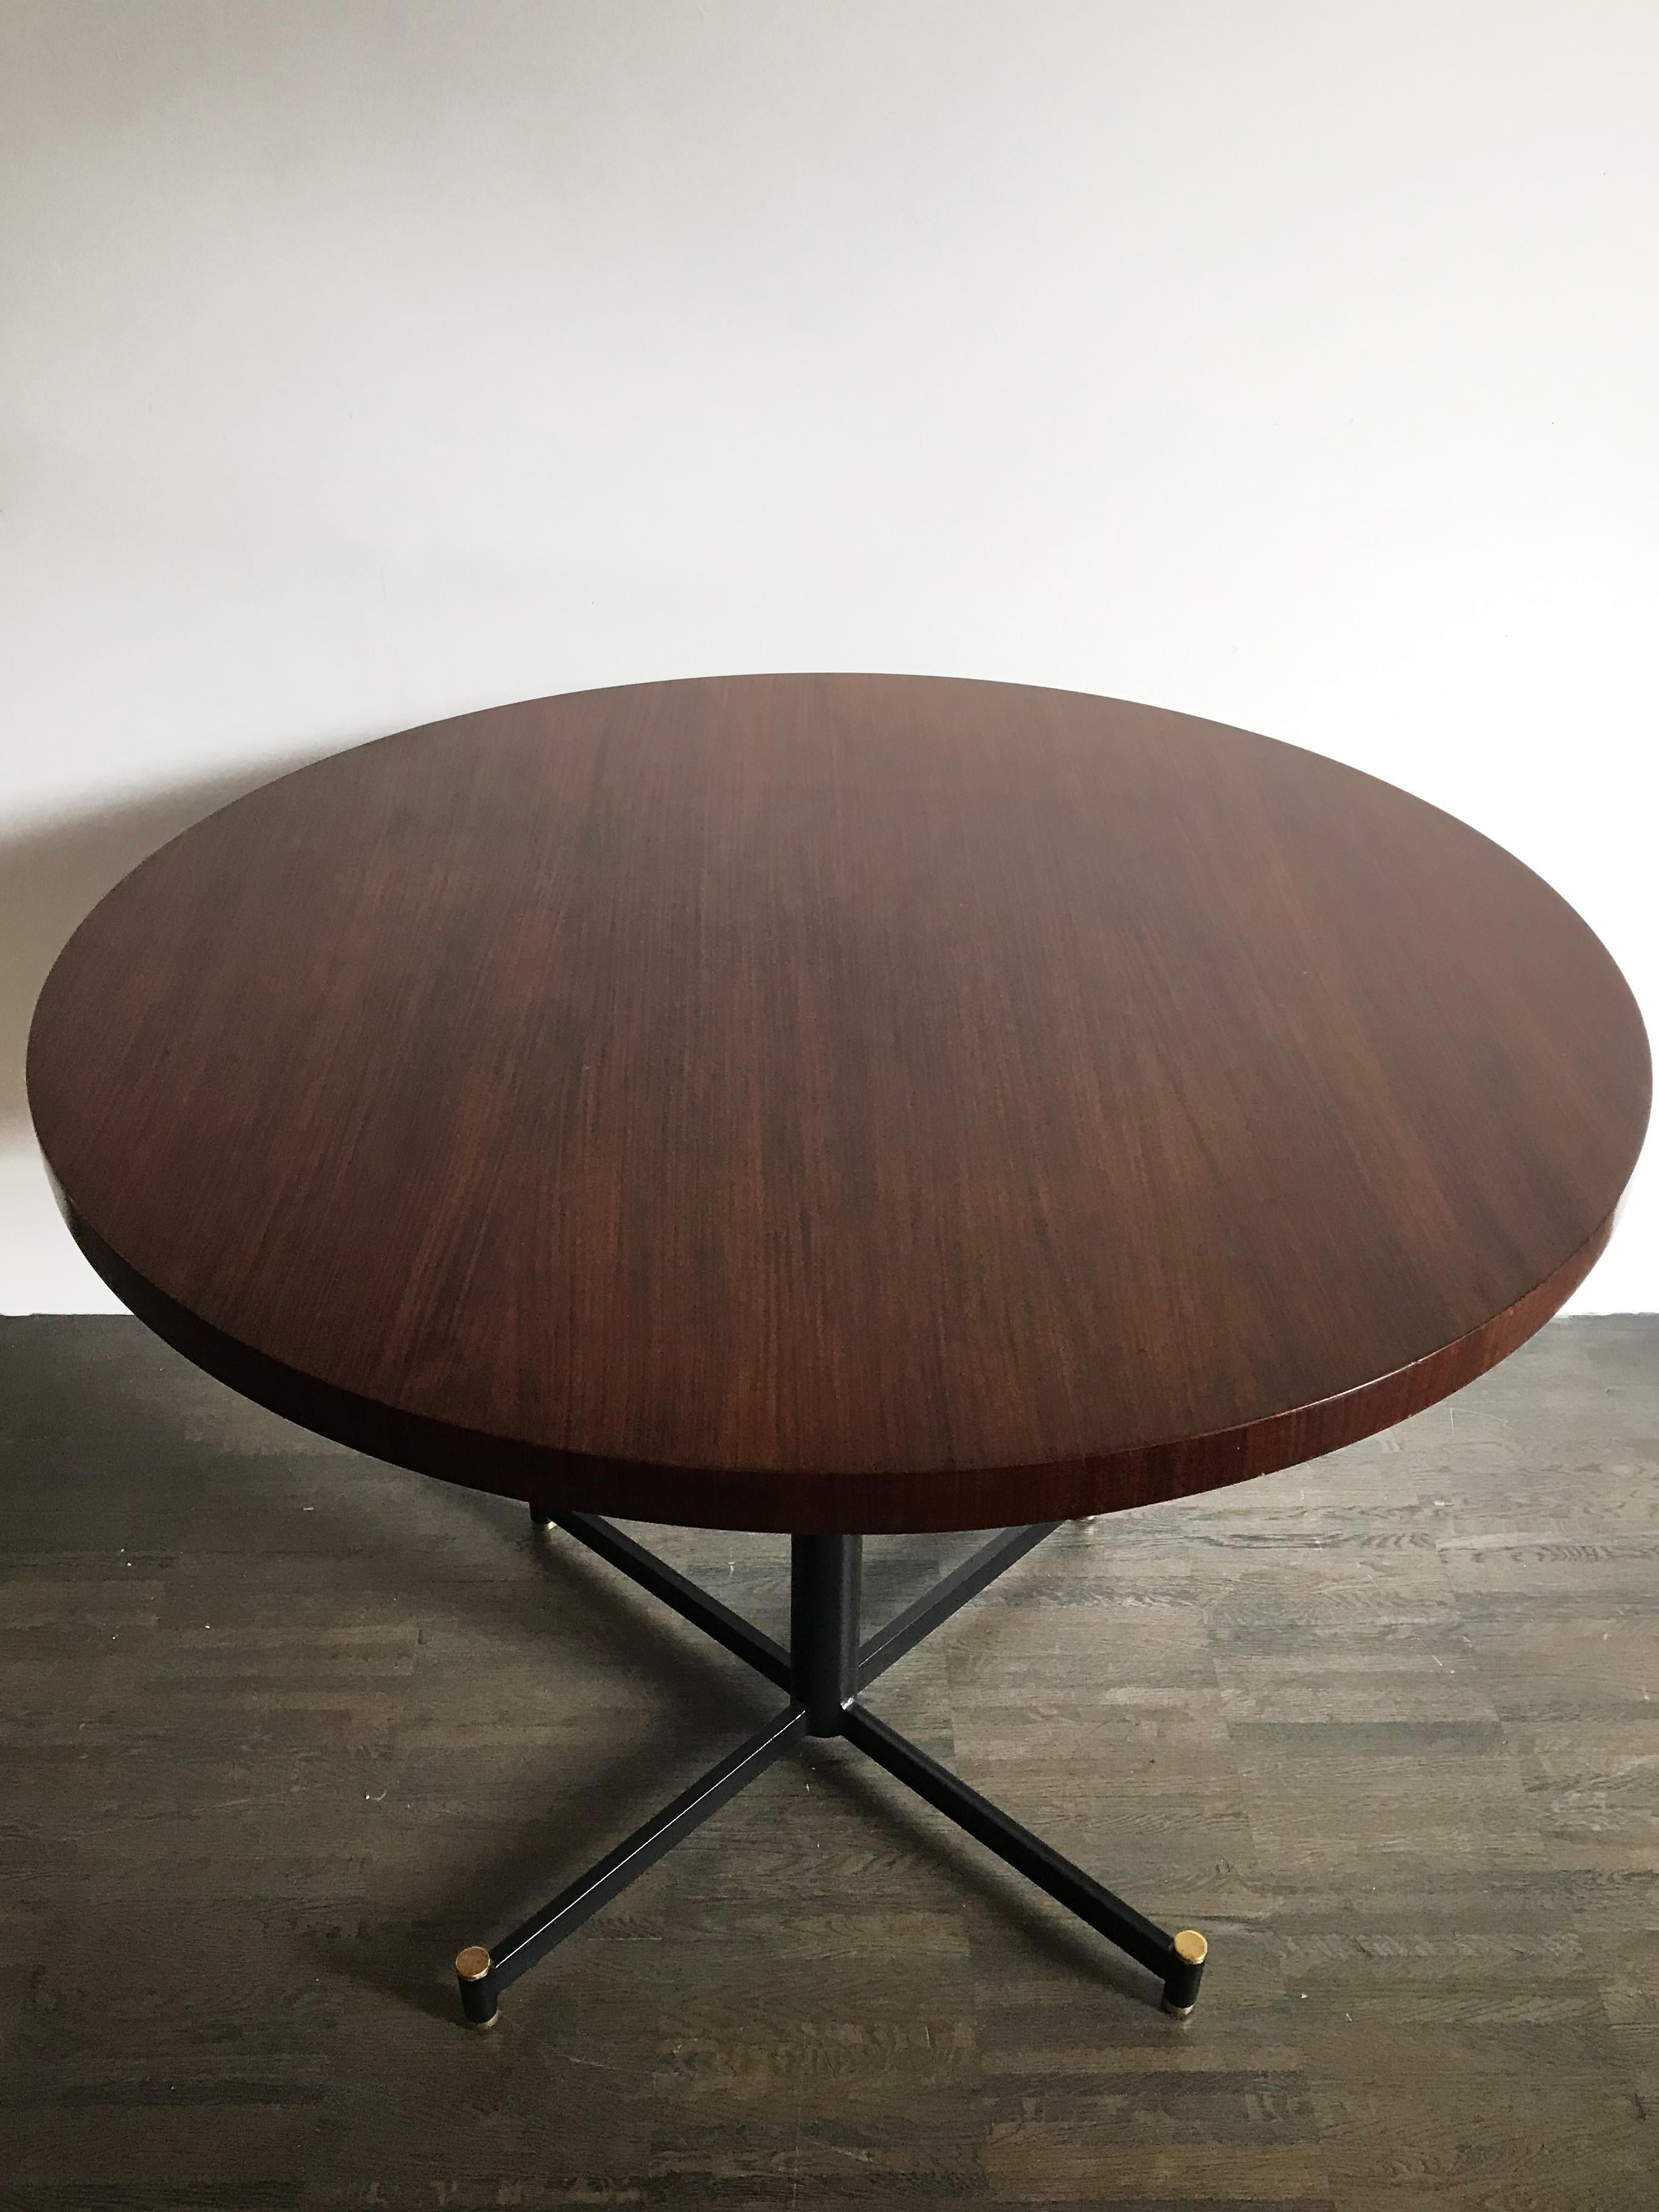 Italian midcentury dining table with circular rosewood veneer top and metal frame with adjustable brass feets, Italy 1950s

Please note that the item is original of the period and this shows normal signs of age and use.